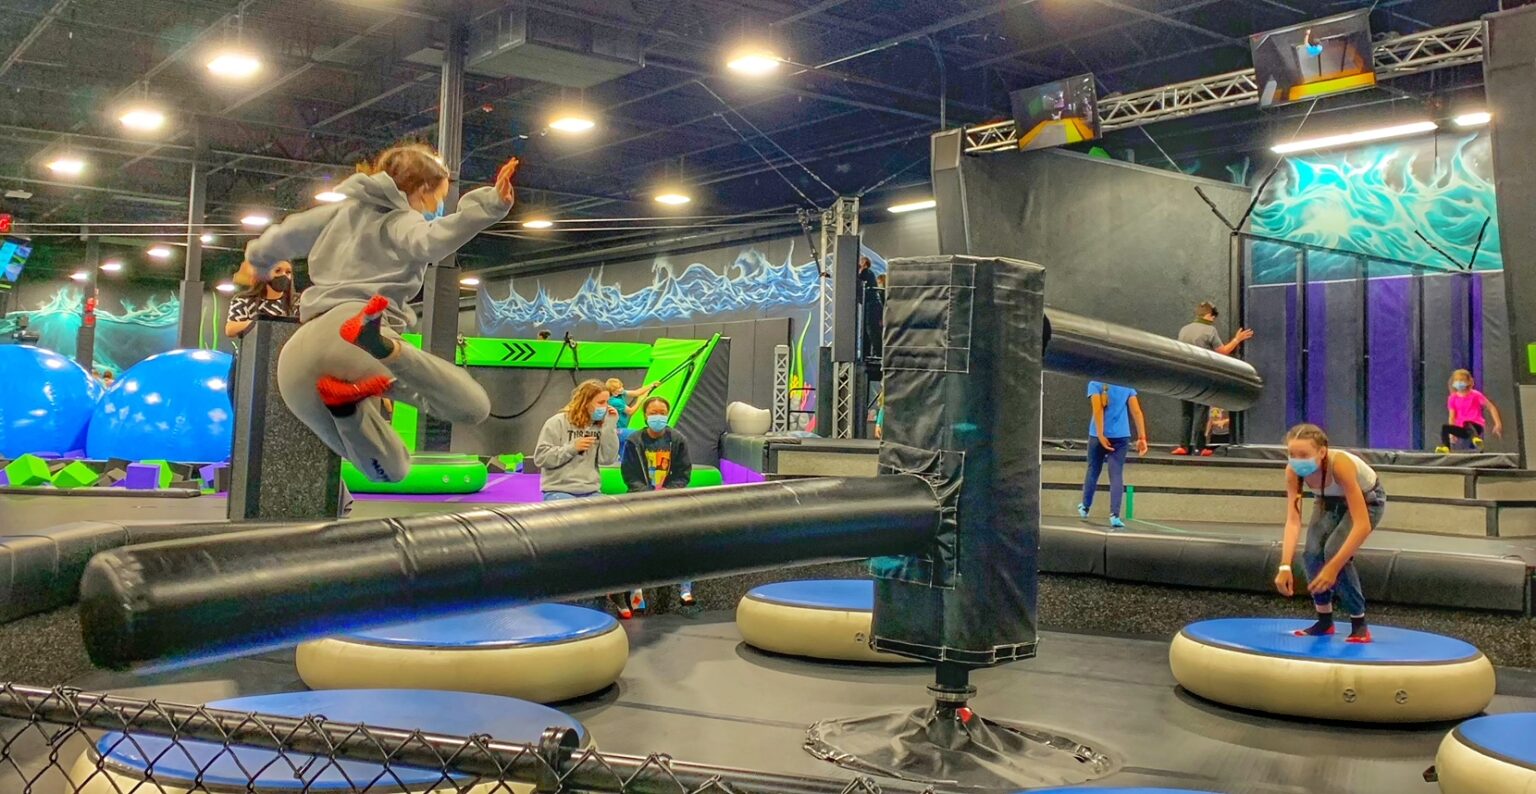 Defy Trampoline Park Discount Tickets & Everything You Need to Know